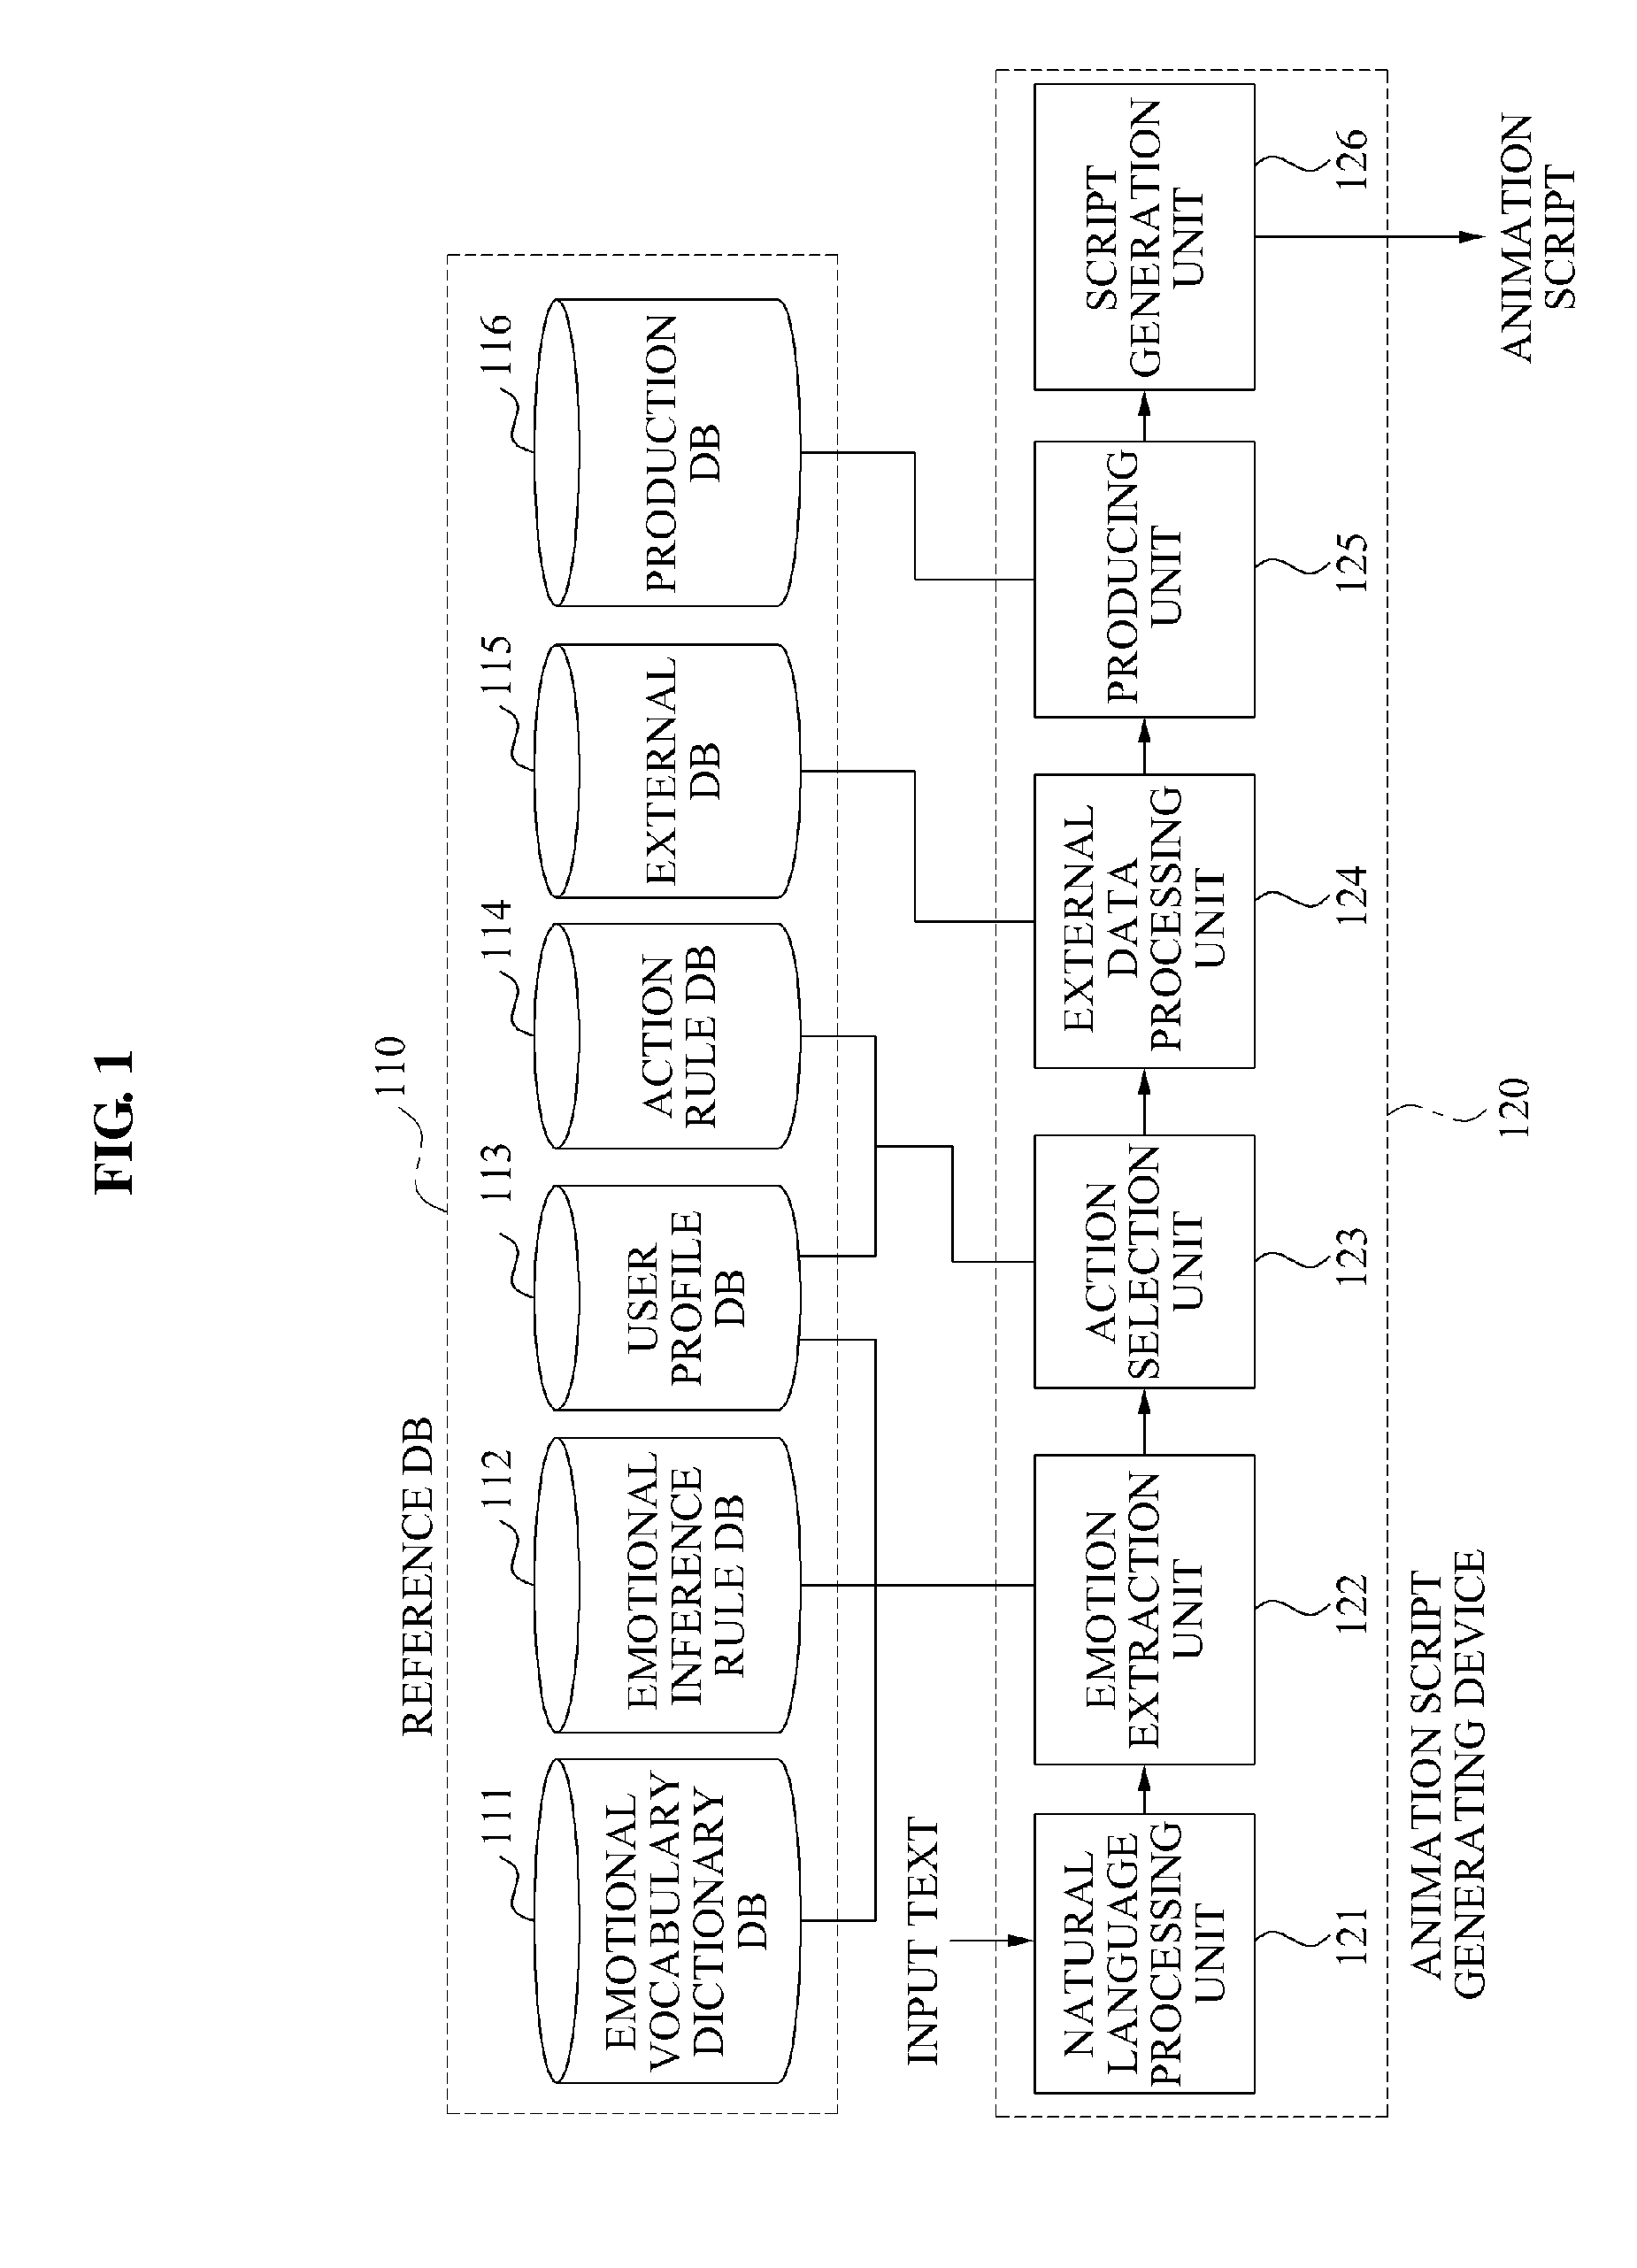 Animation system and methods for generating animation based on text-based data and user information